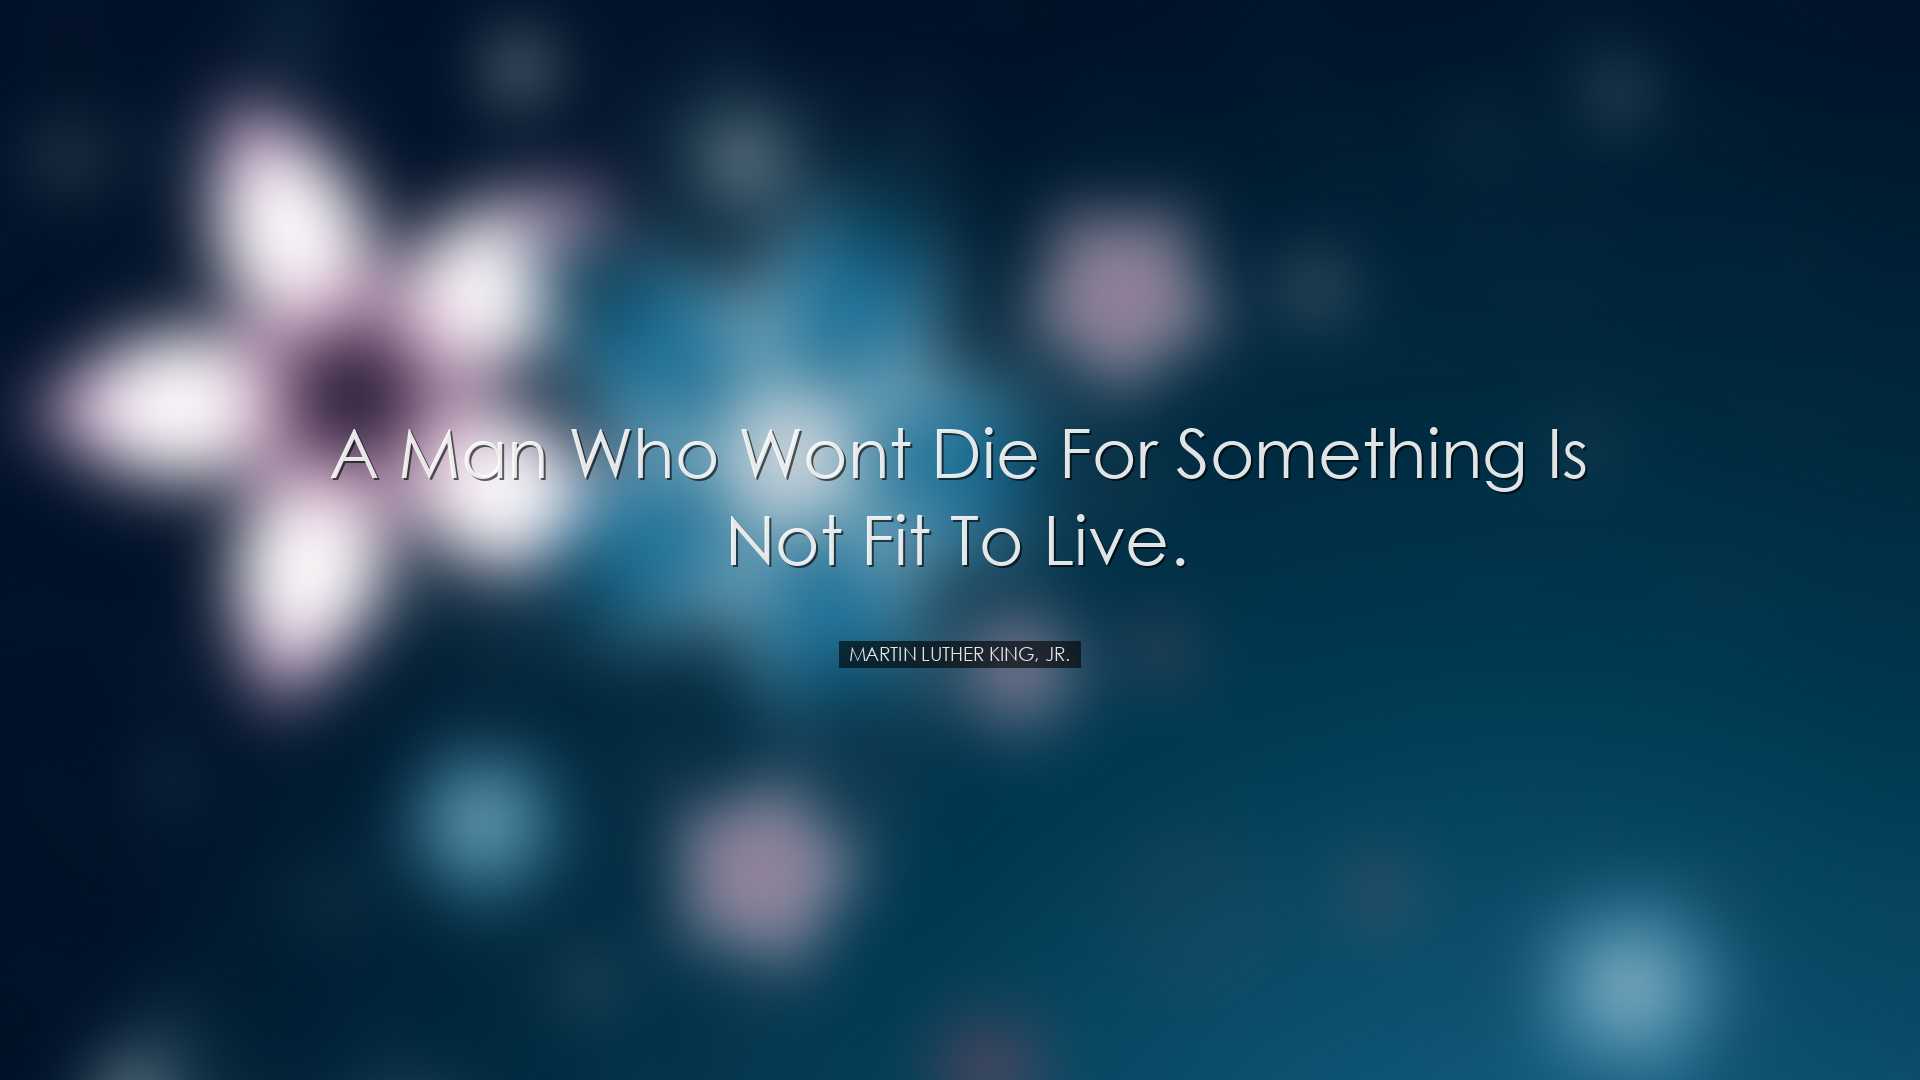 A man who wont die for something is not fit to live. - Martin Luth